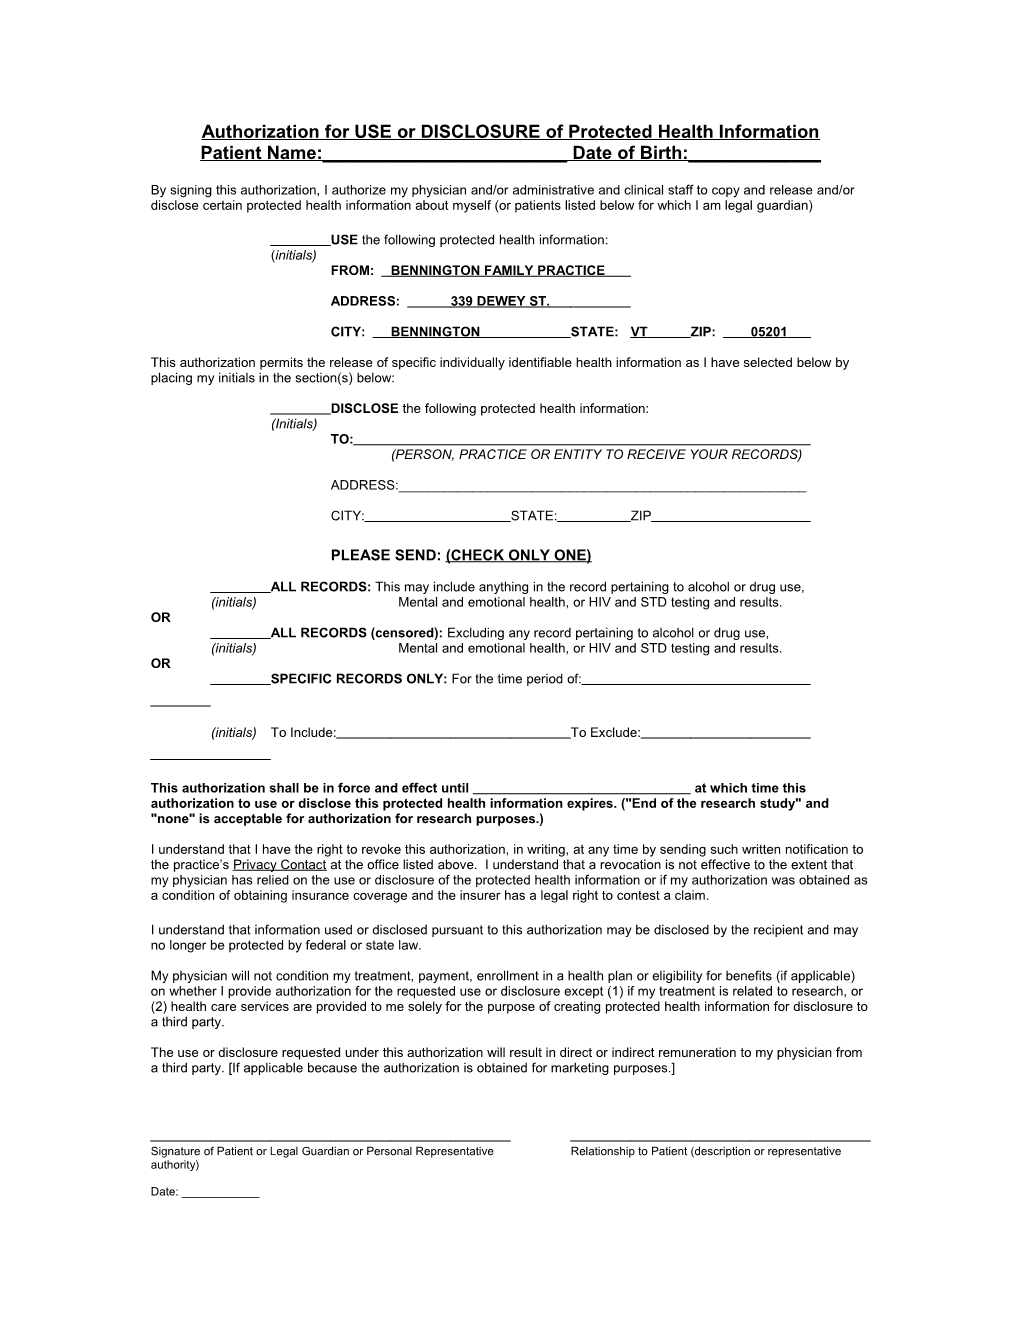 Authorization for USE Or DISCLOSURE of Protected Health Information